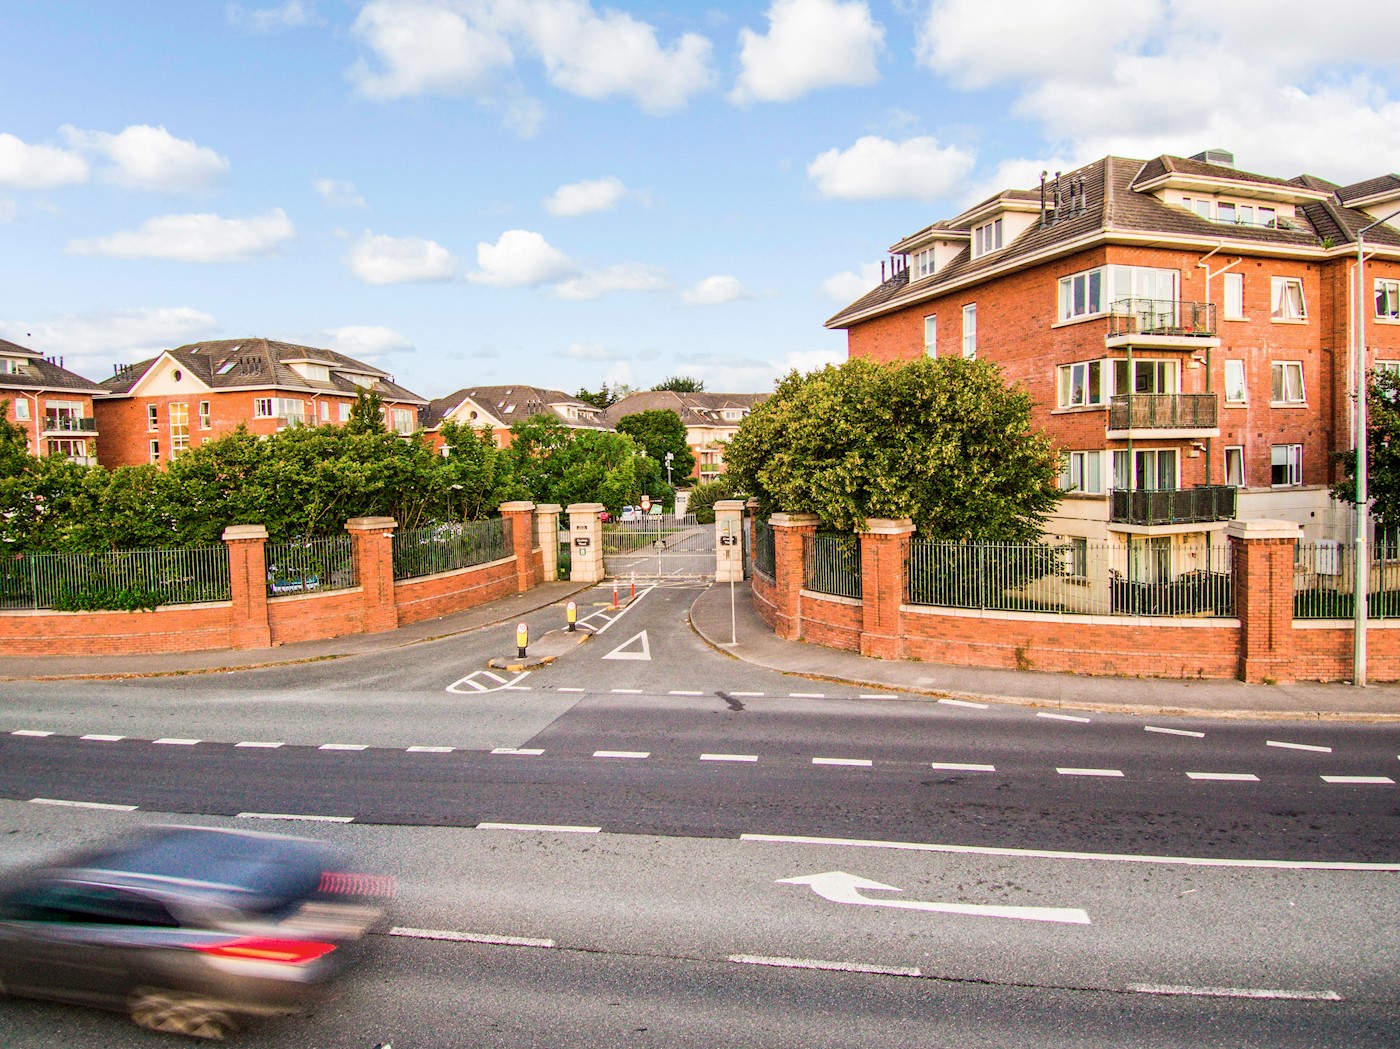 Apartment 10 Maple, Grattan Wood, The Hole In The Wall Road, Dublin 13, D13 RR96 1/16